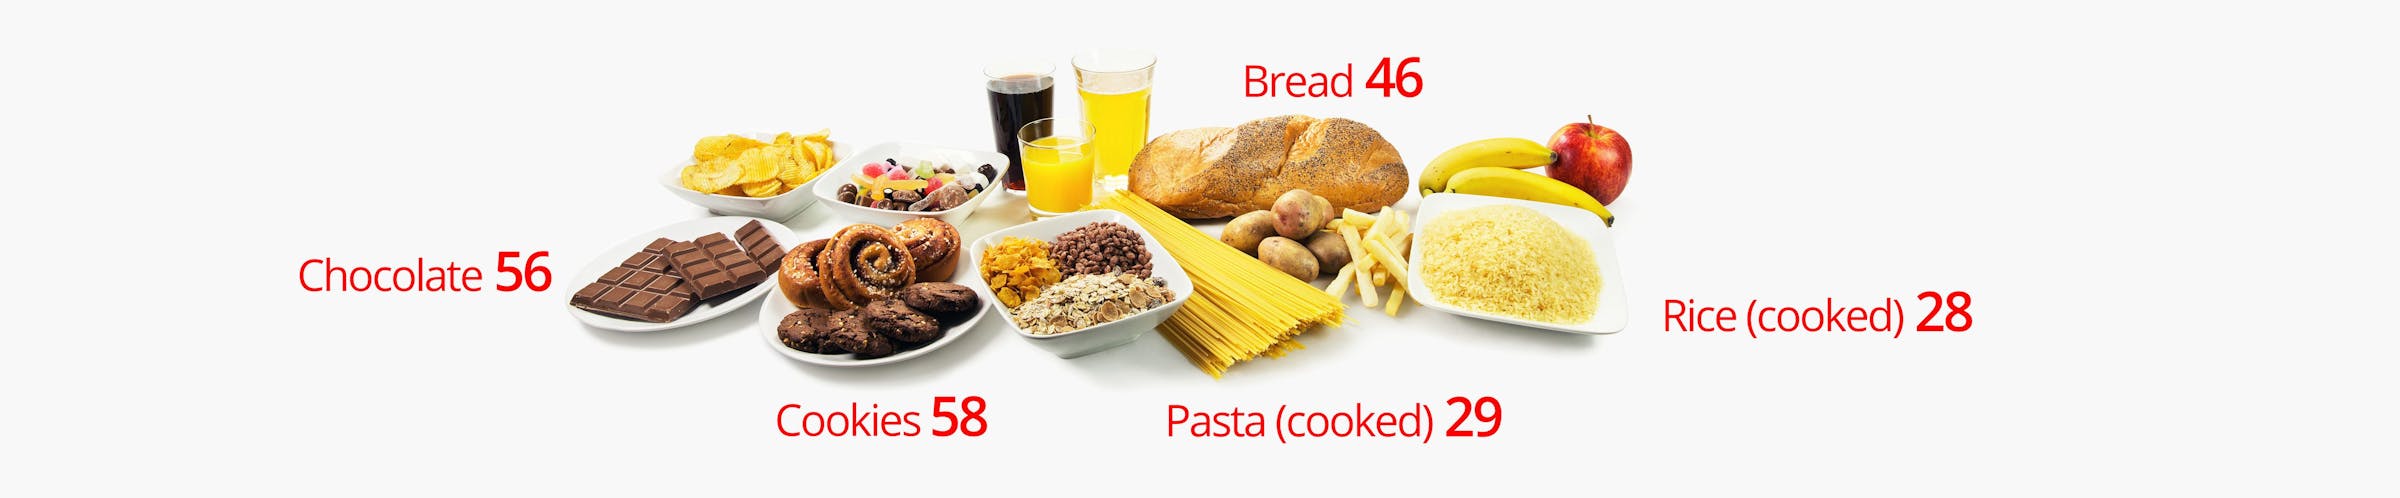 Carbohydrates in grains (like bread, pasta, rice) and added sugars